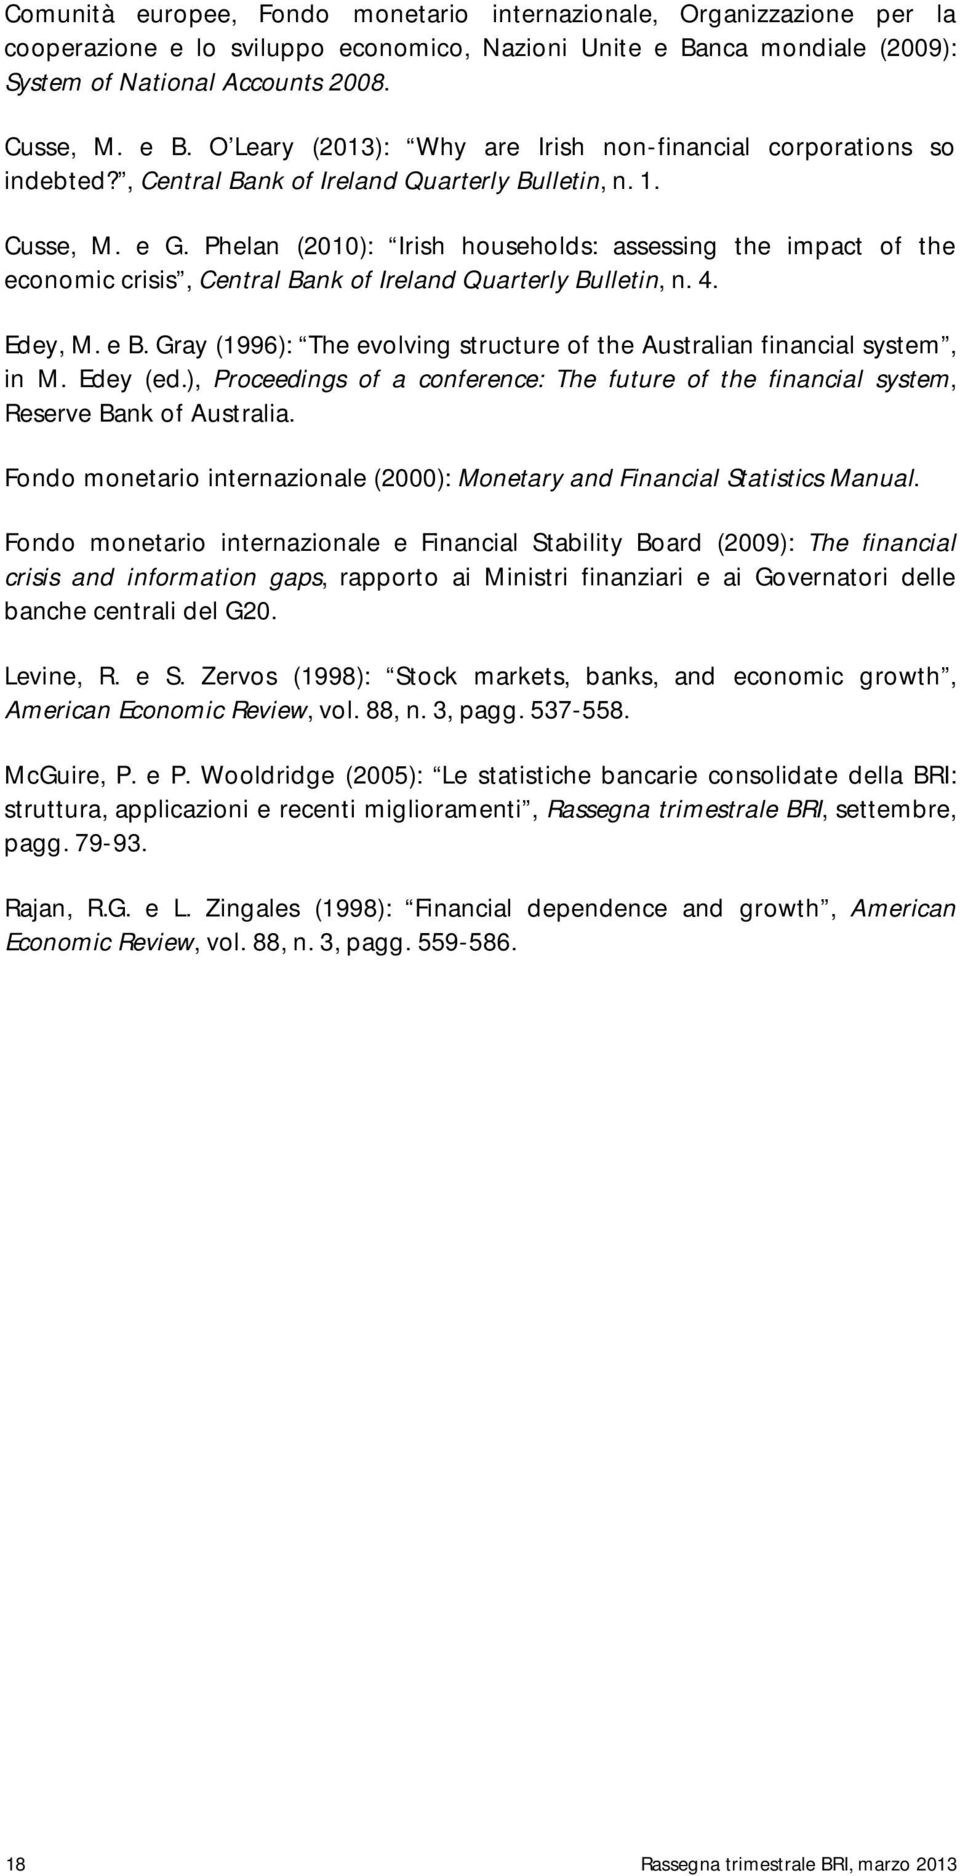 Edey, M. e B. Gray (1996): The evolving structure of the Australian financial system, in M. Edey (ed.), Proceedings of a conference: The future of the financial system, Reserve Bank of Australia.